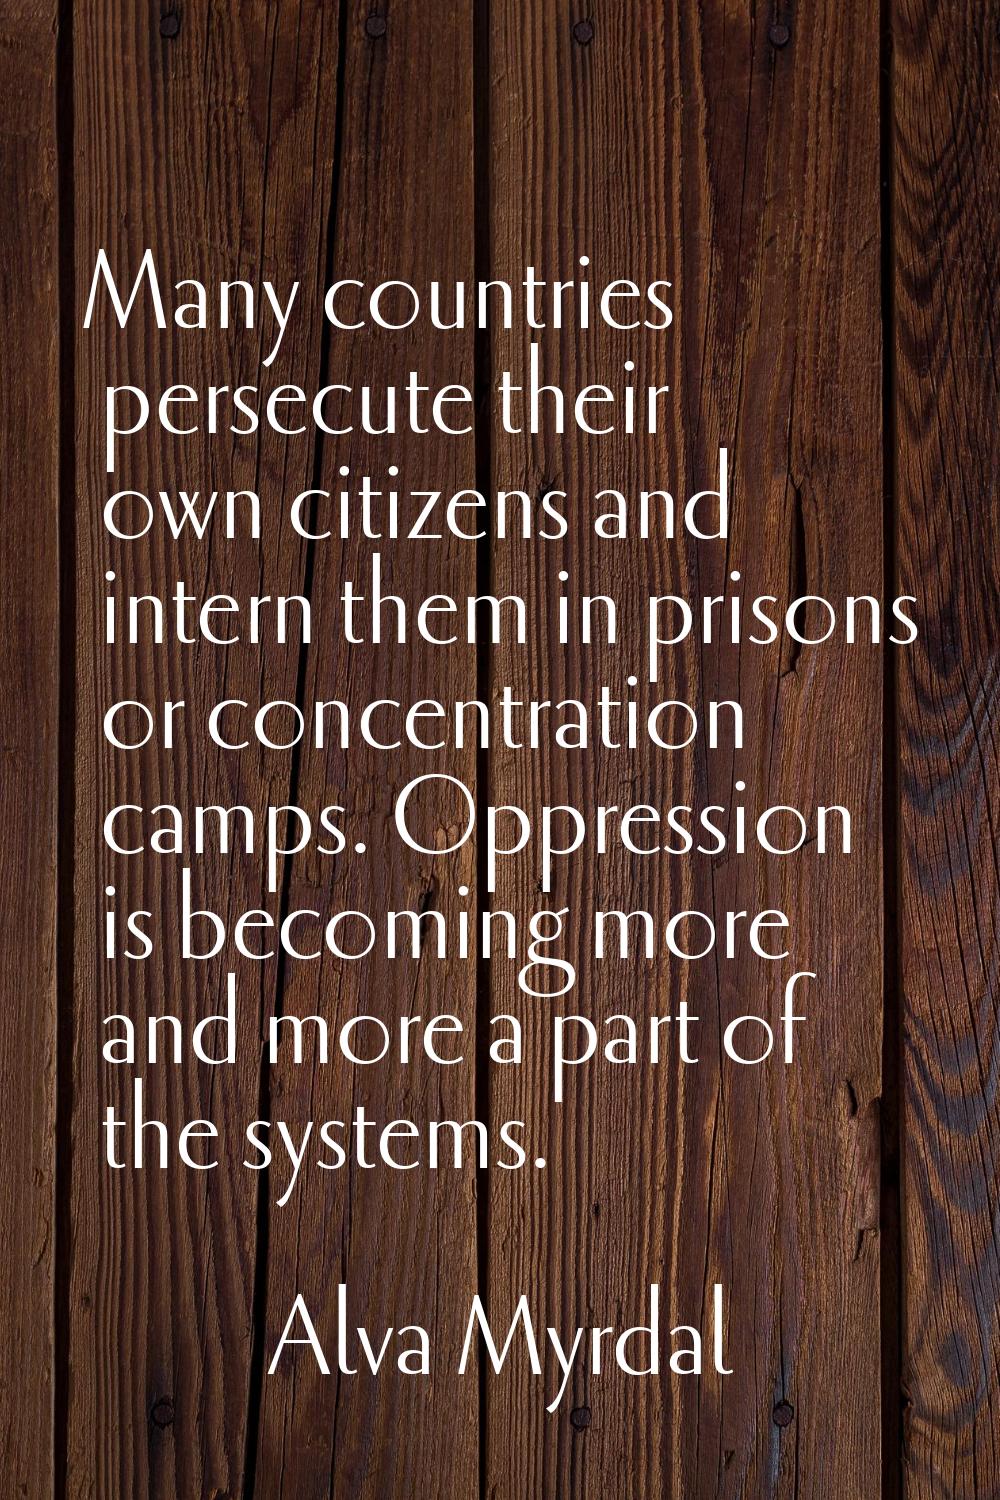 Many countries persecute their own citizens and intern them in prisons or concentration camps. Oppr